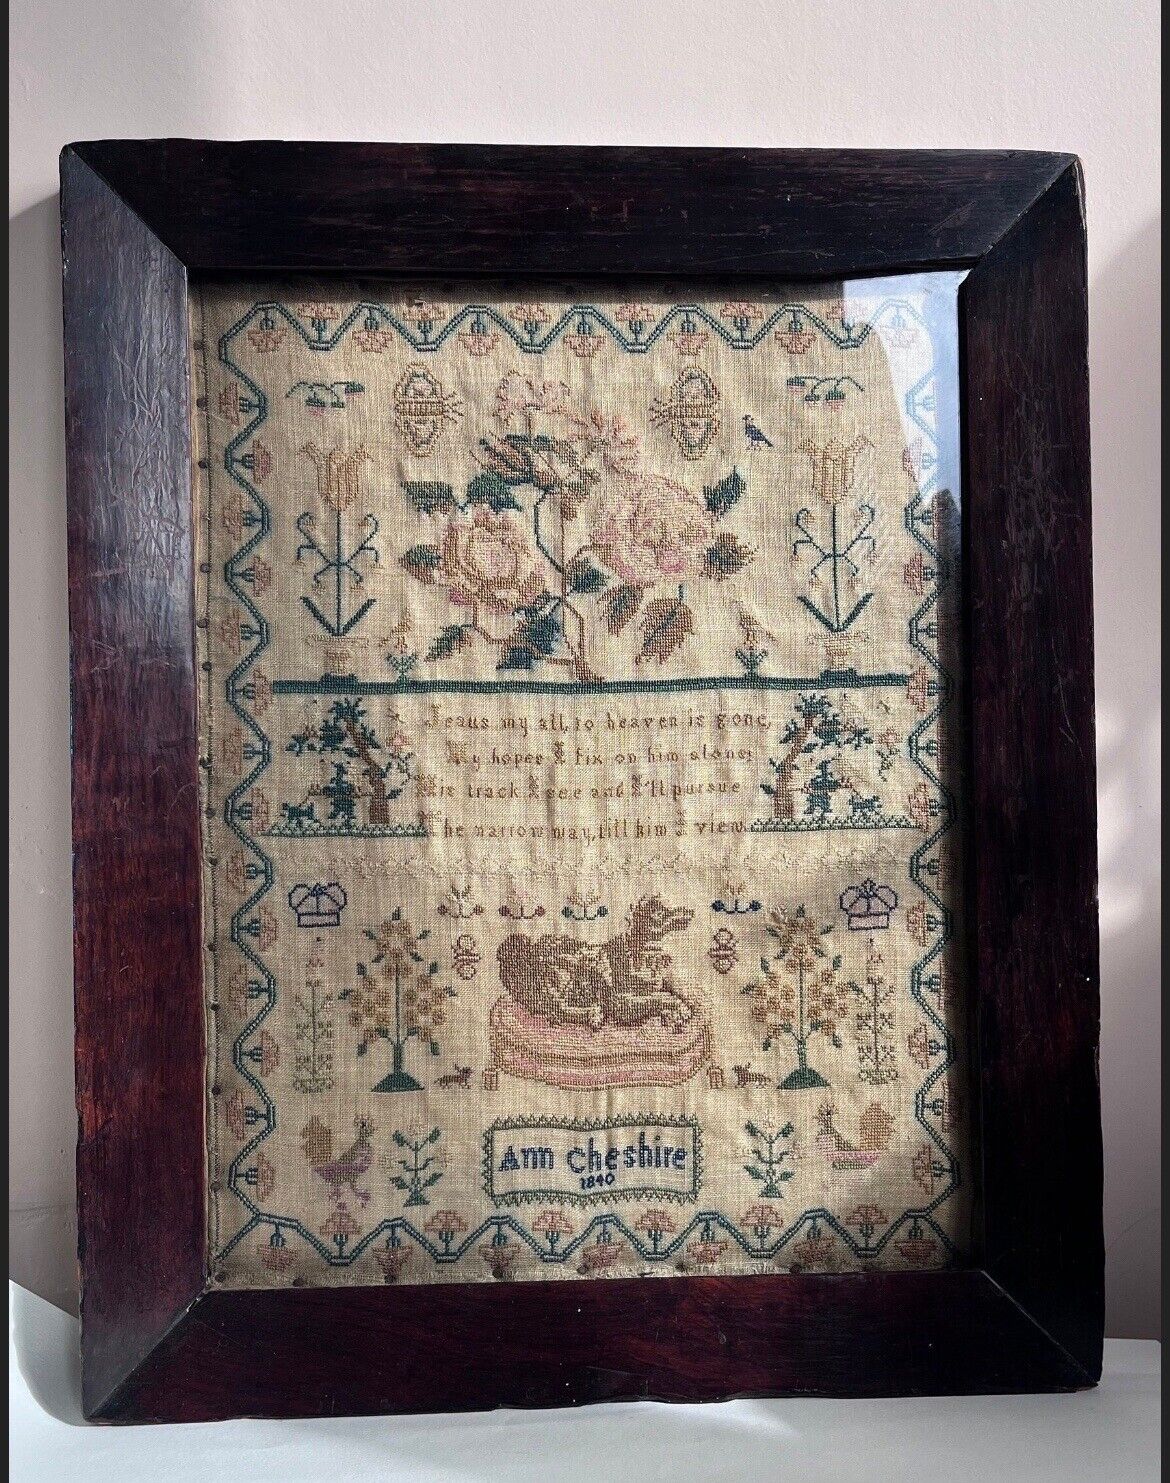 Antique Victorian Framed Needlework Sampler By Ann Cheshire Dated 1840.